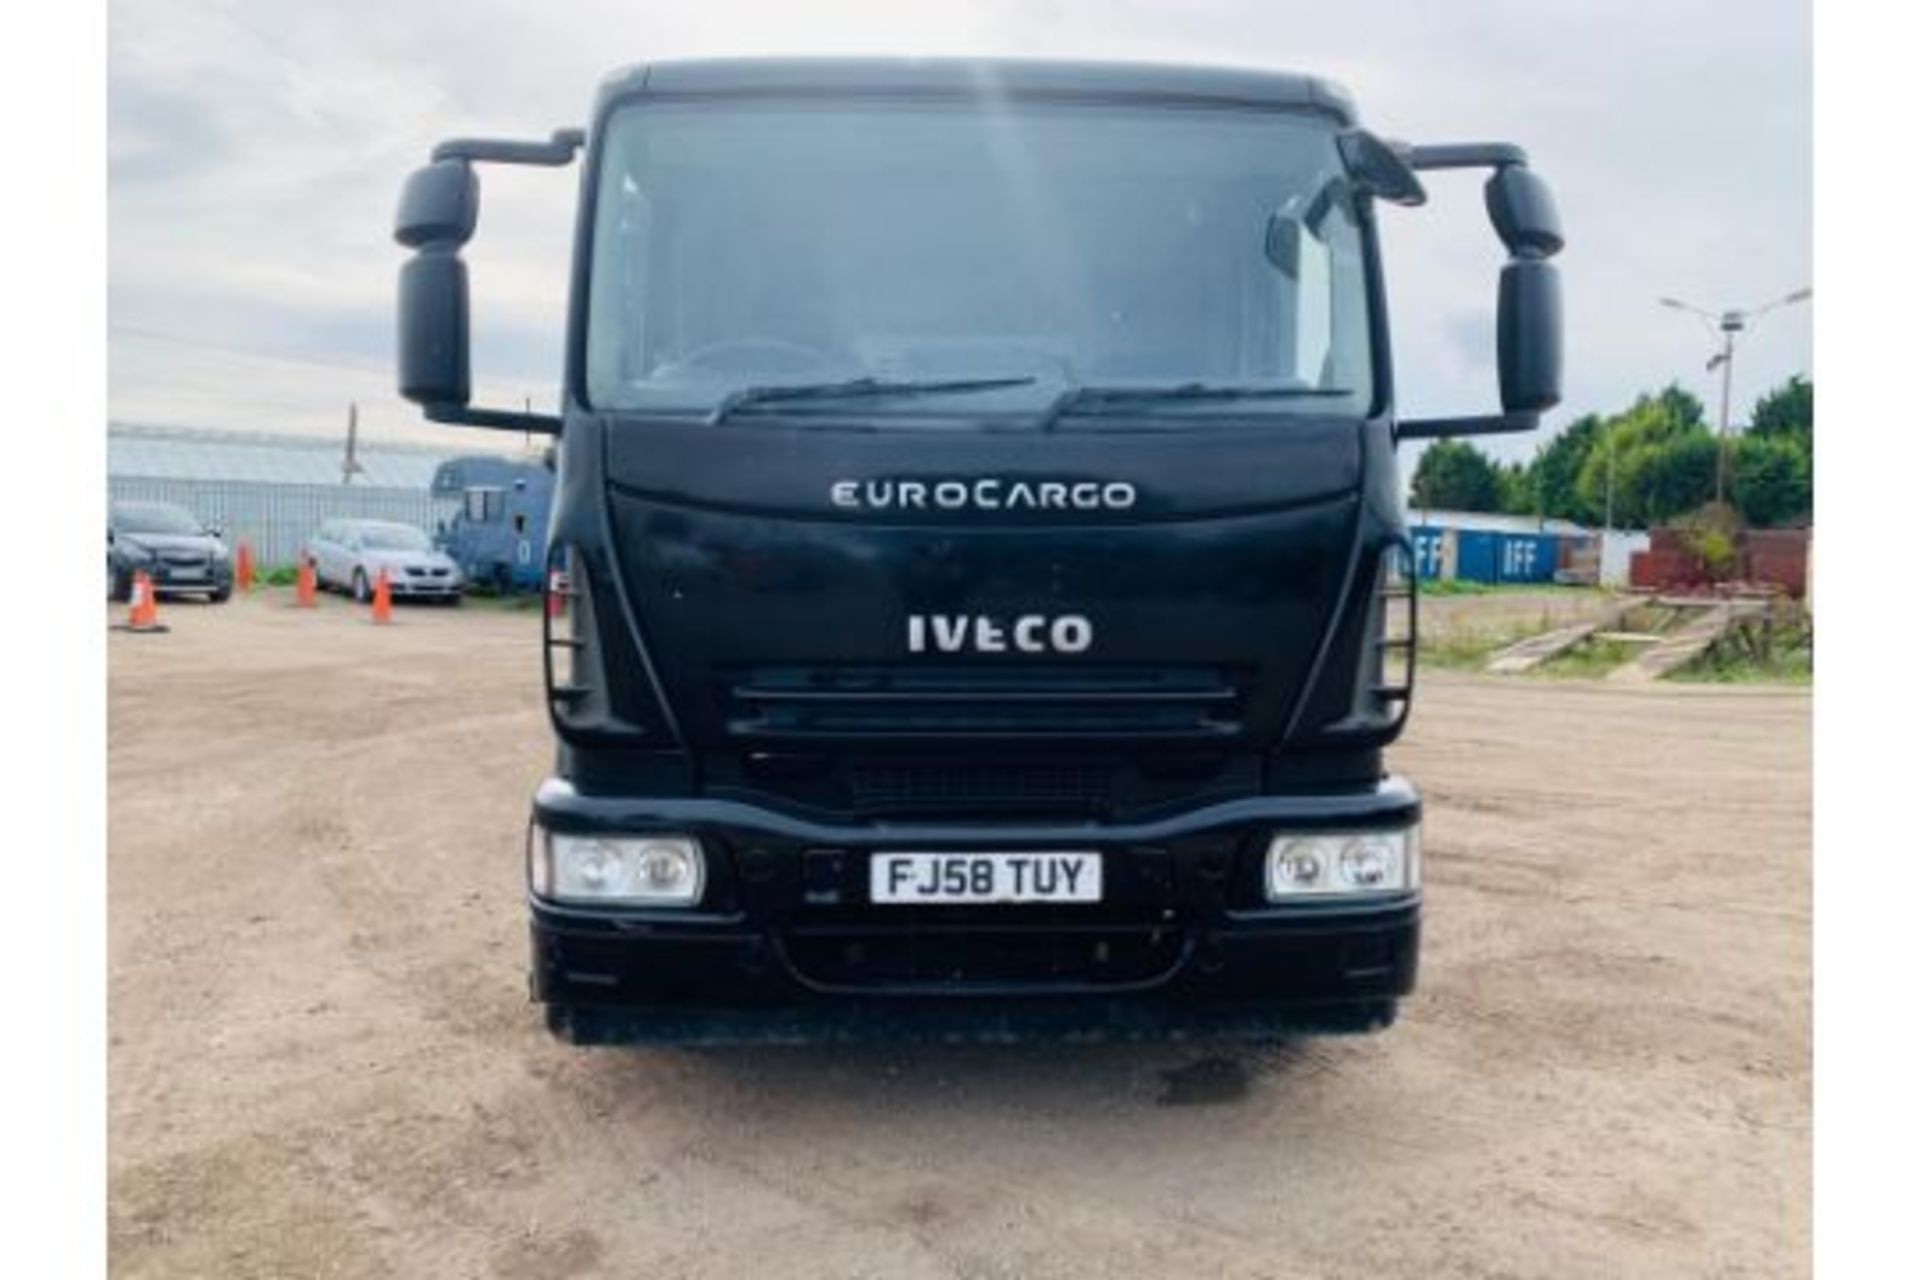 (RESERVE MET) Iveco Eurocargo 180E25 - 2009 Year - 18 Tonne - 4x2 - Day Cab Truck - Image 5 of 11